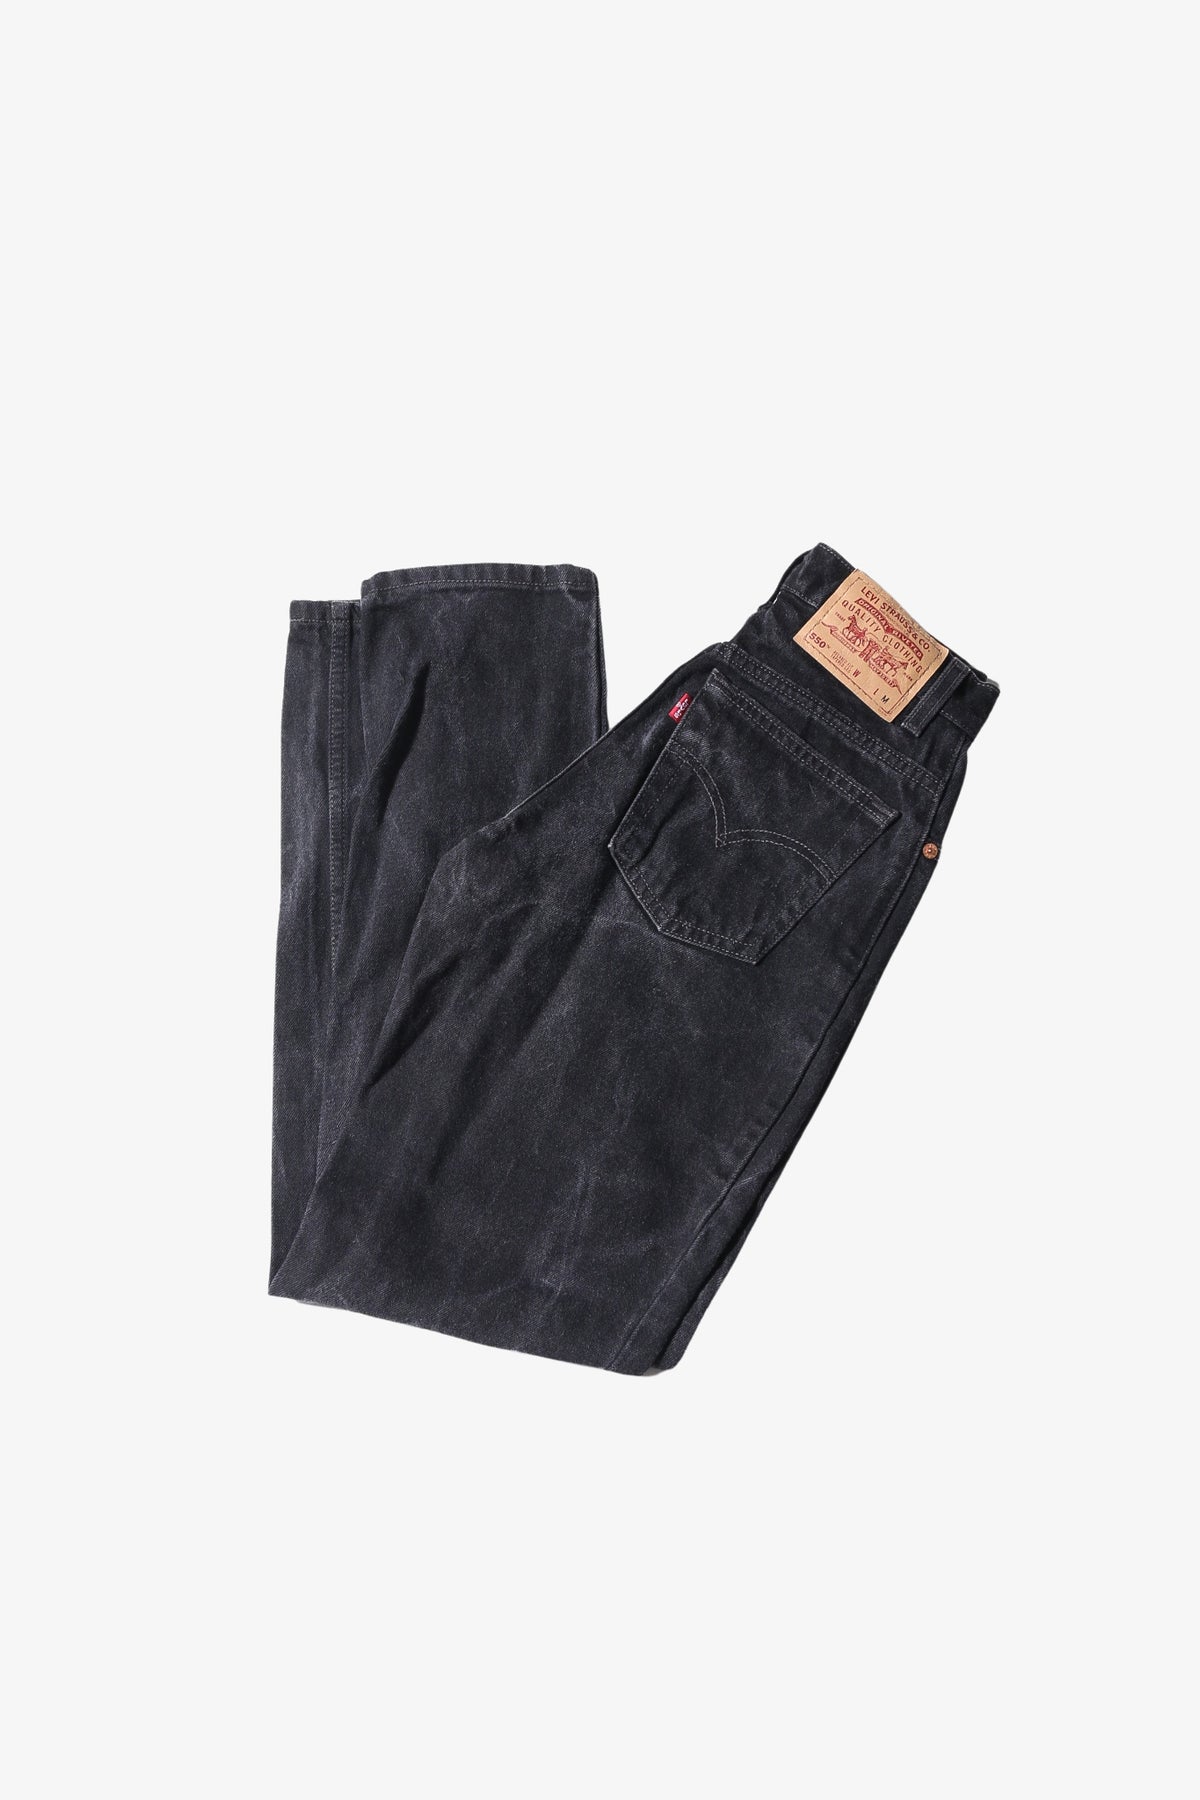 90'S LEVIS 550 RELAXED FIT TAPERED LEG BLACK WASH JEANS (LABELLED 3 JR –  Vintage Marketplace